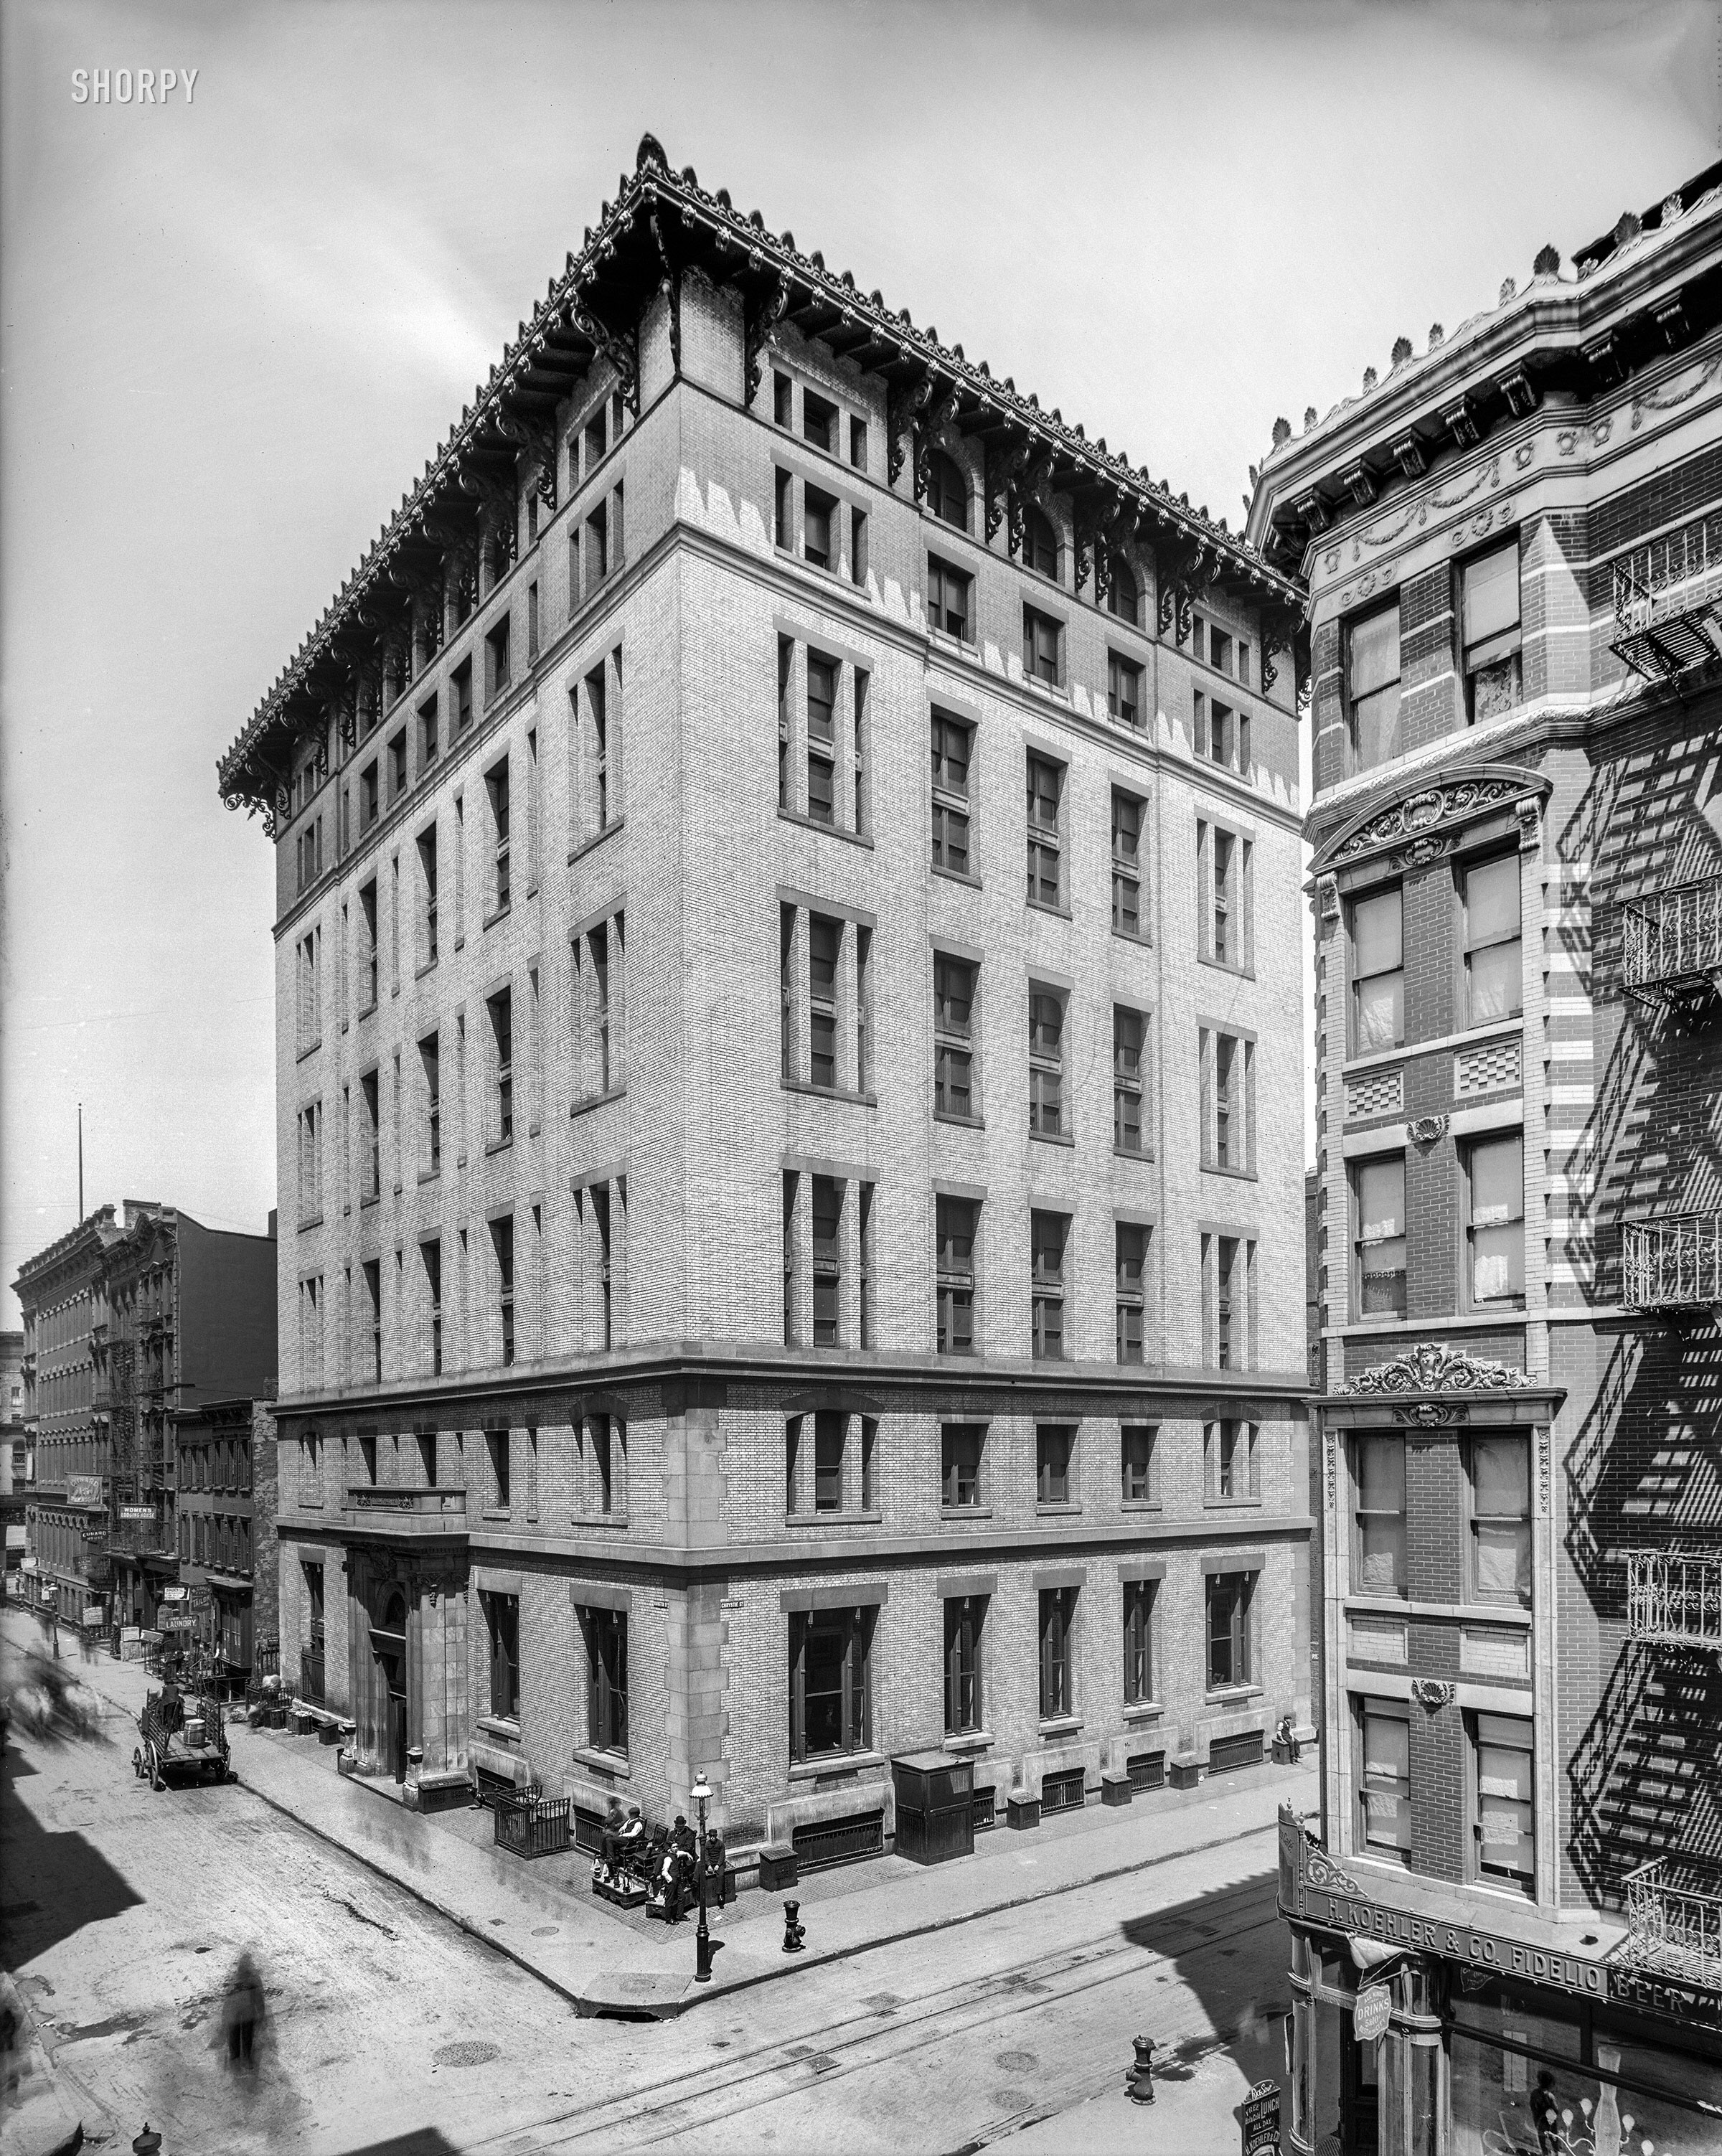 "Mills House No. 2, Rivington Street, New York, N.Y." This "hostel for poor gentlemen," one of three erected by the banker Darius Ogden Mills as lodging houses for working-class men, contained 600 small rooms that rented for 20 cents a day. Our title honors the several ectoplasmic pedestrians whose shades inhabit this time exposure. 8x10 glass negative, Detroit Publishing Co. View full size.